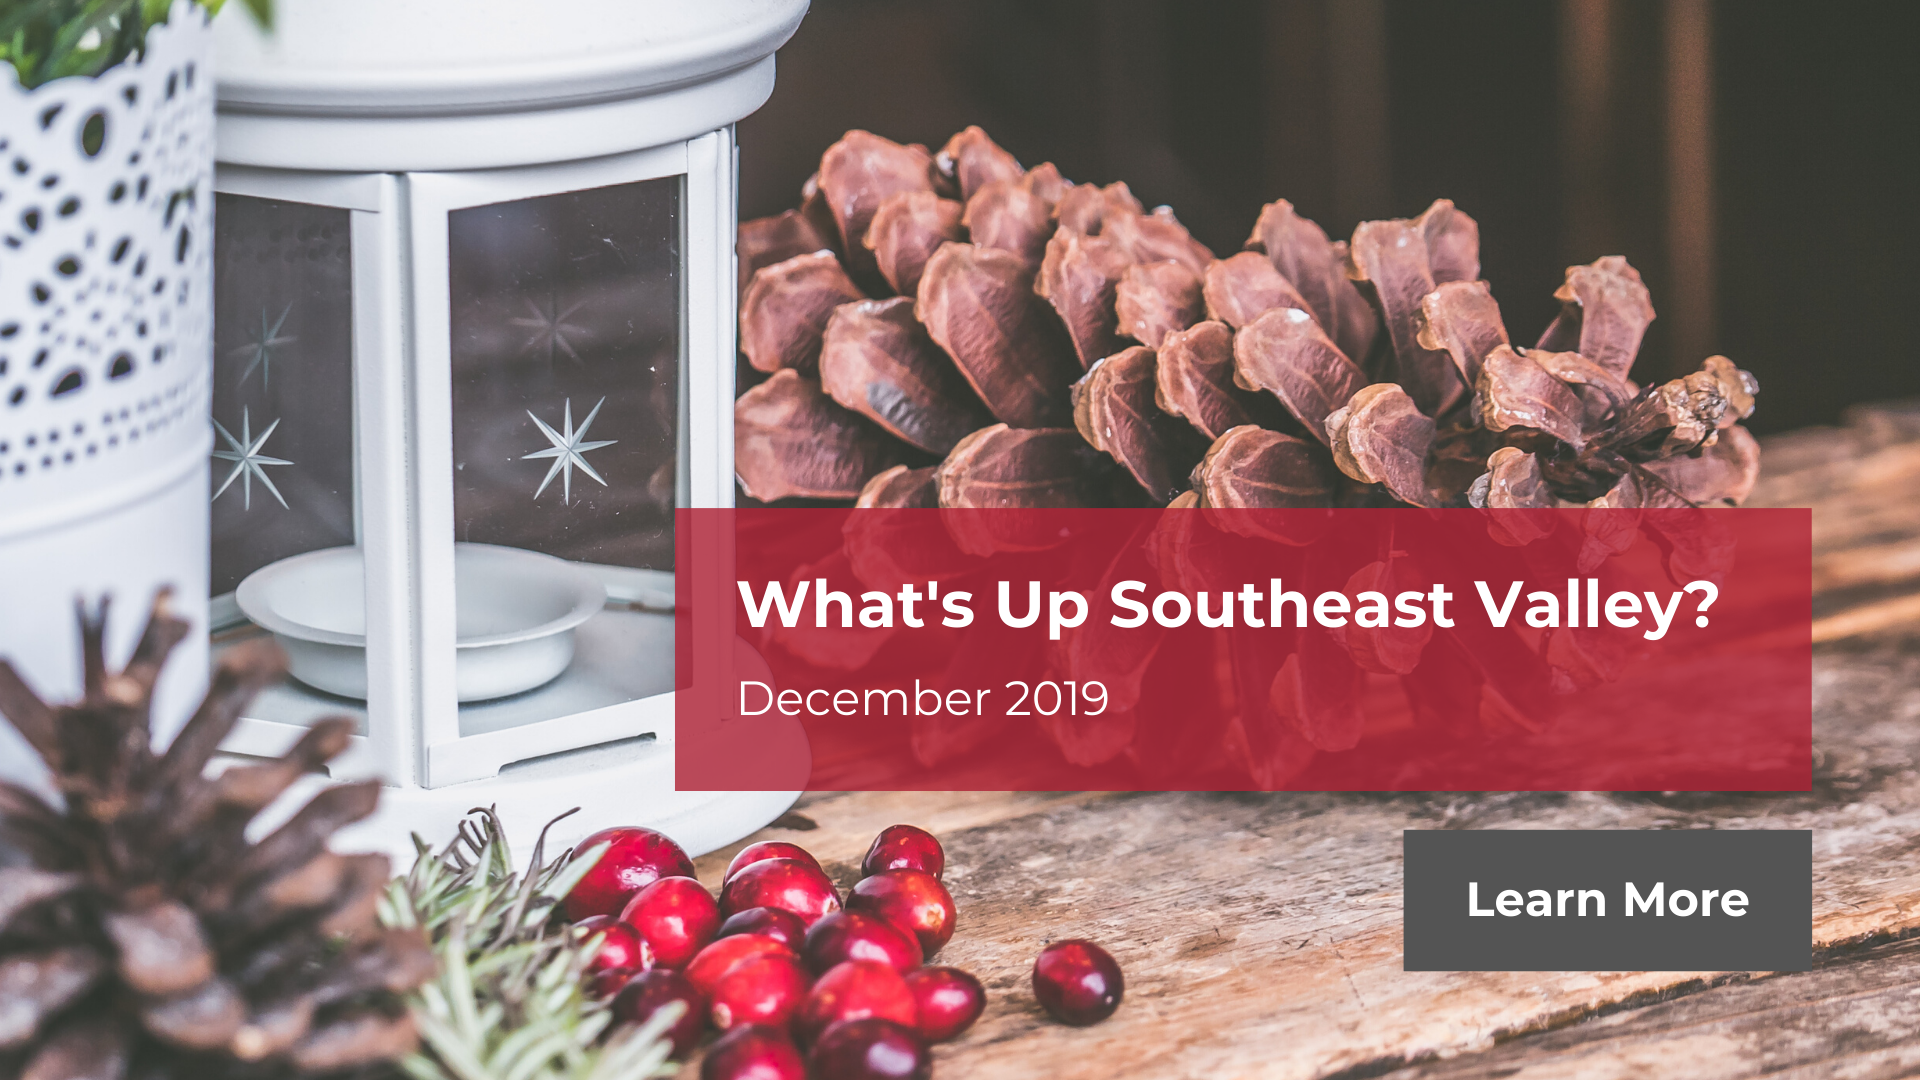 What's Up Southeast Valley? December 2019 